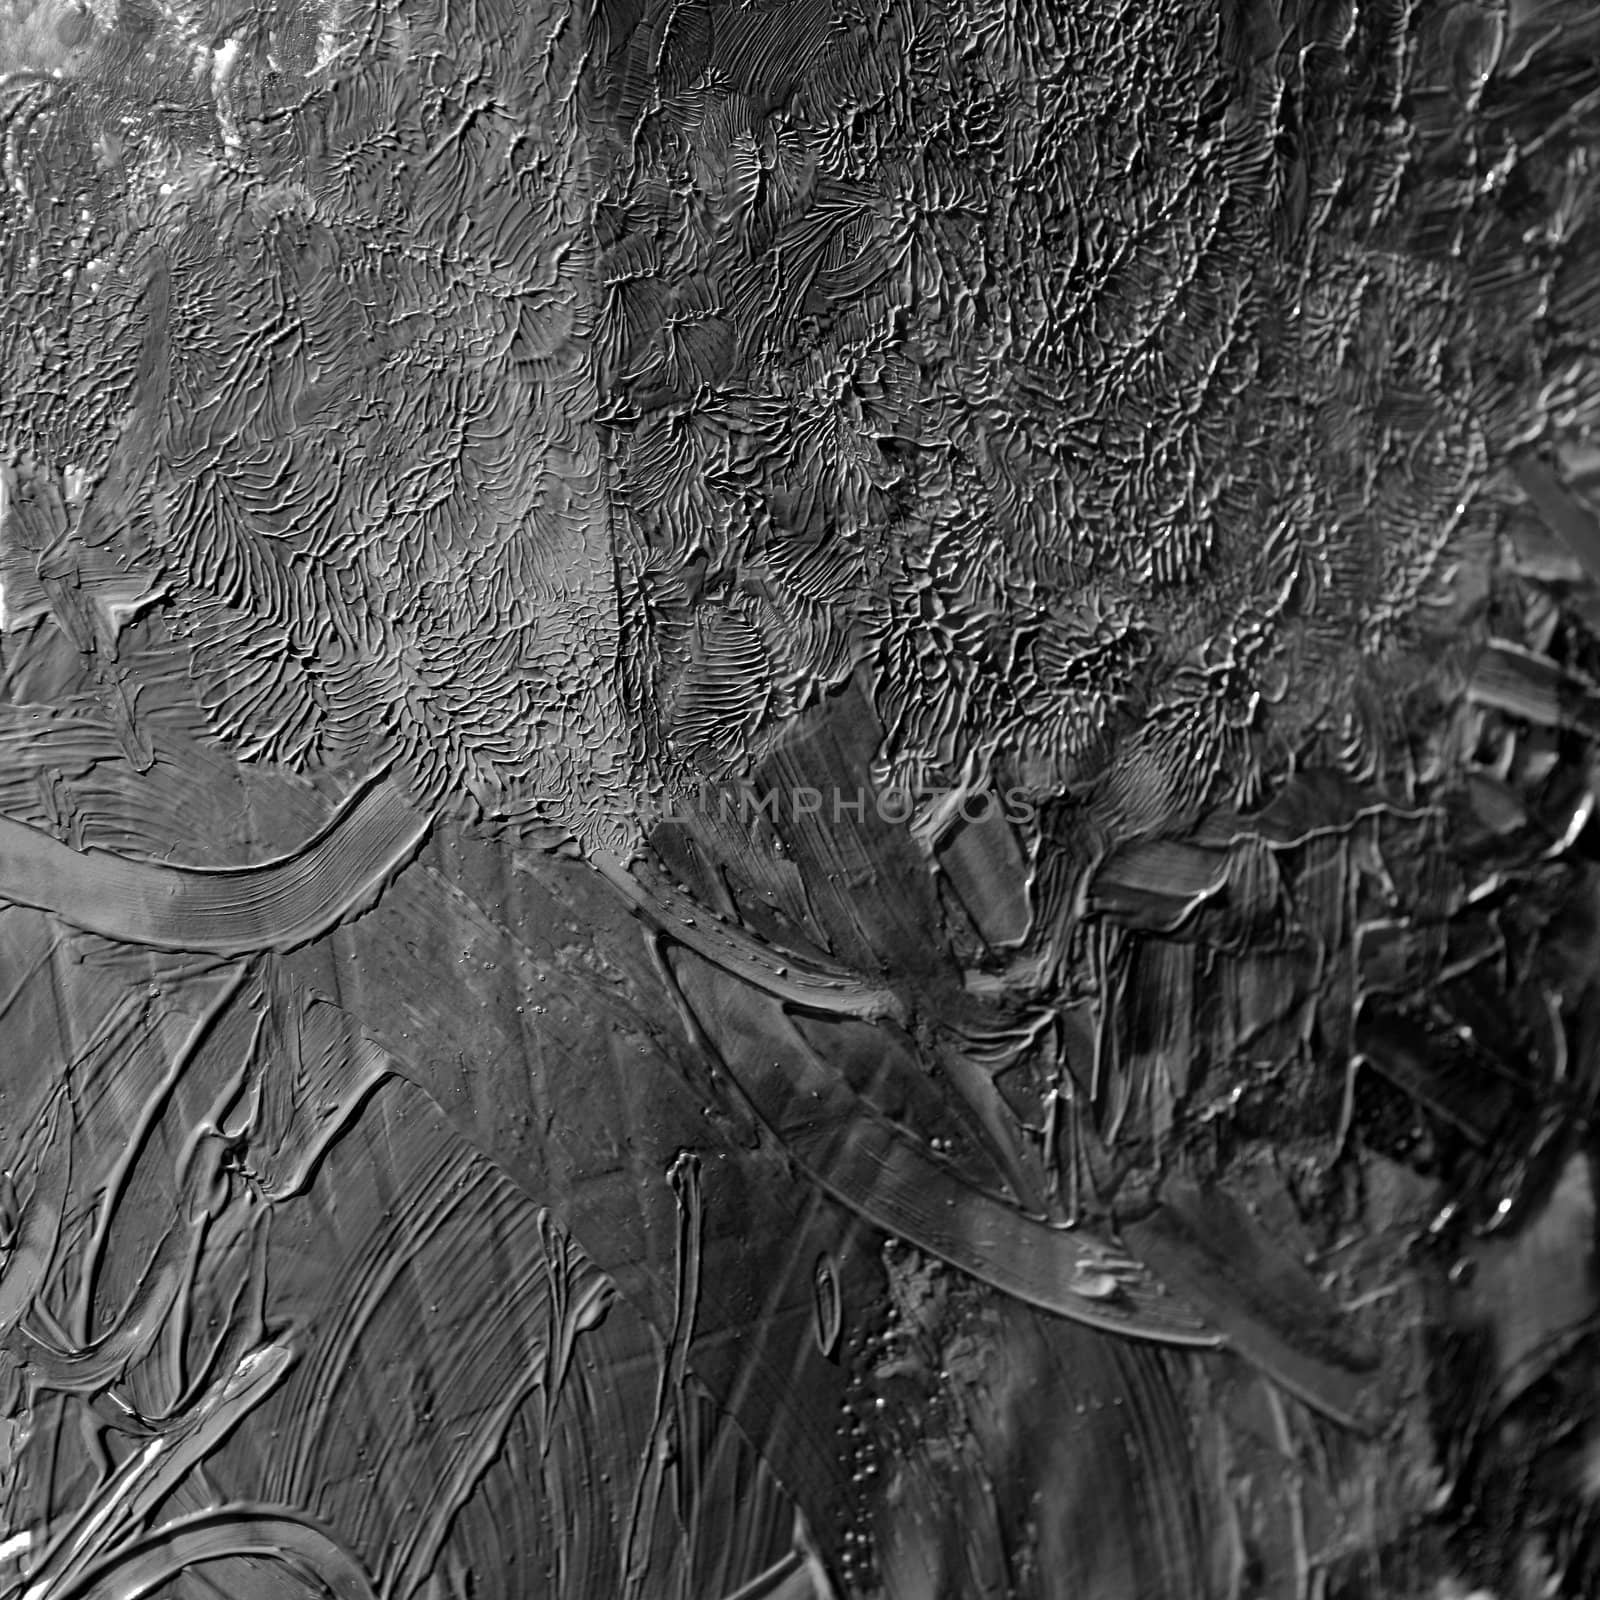 Dark mud, grease painted texture in black and white